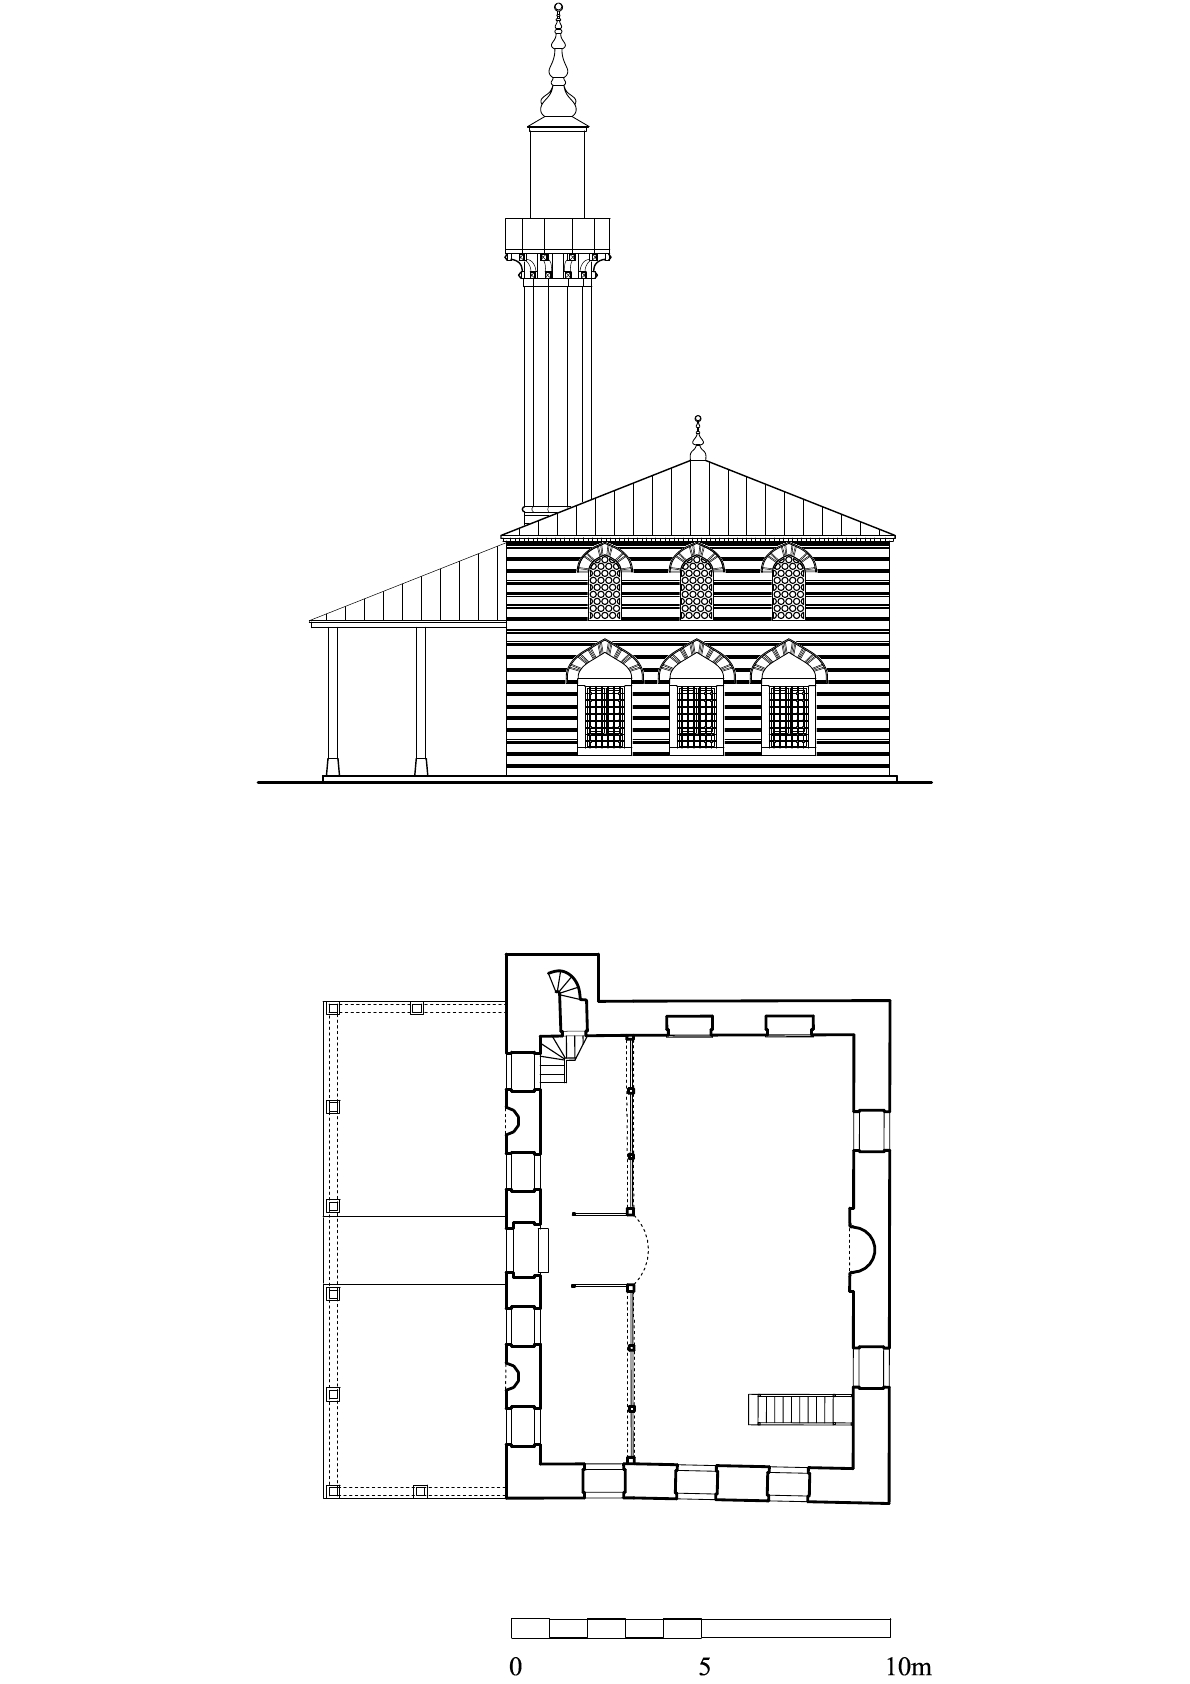 Floor plan and elevation of mosque with hypothetical reconstruction of portico